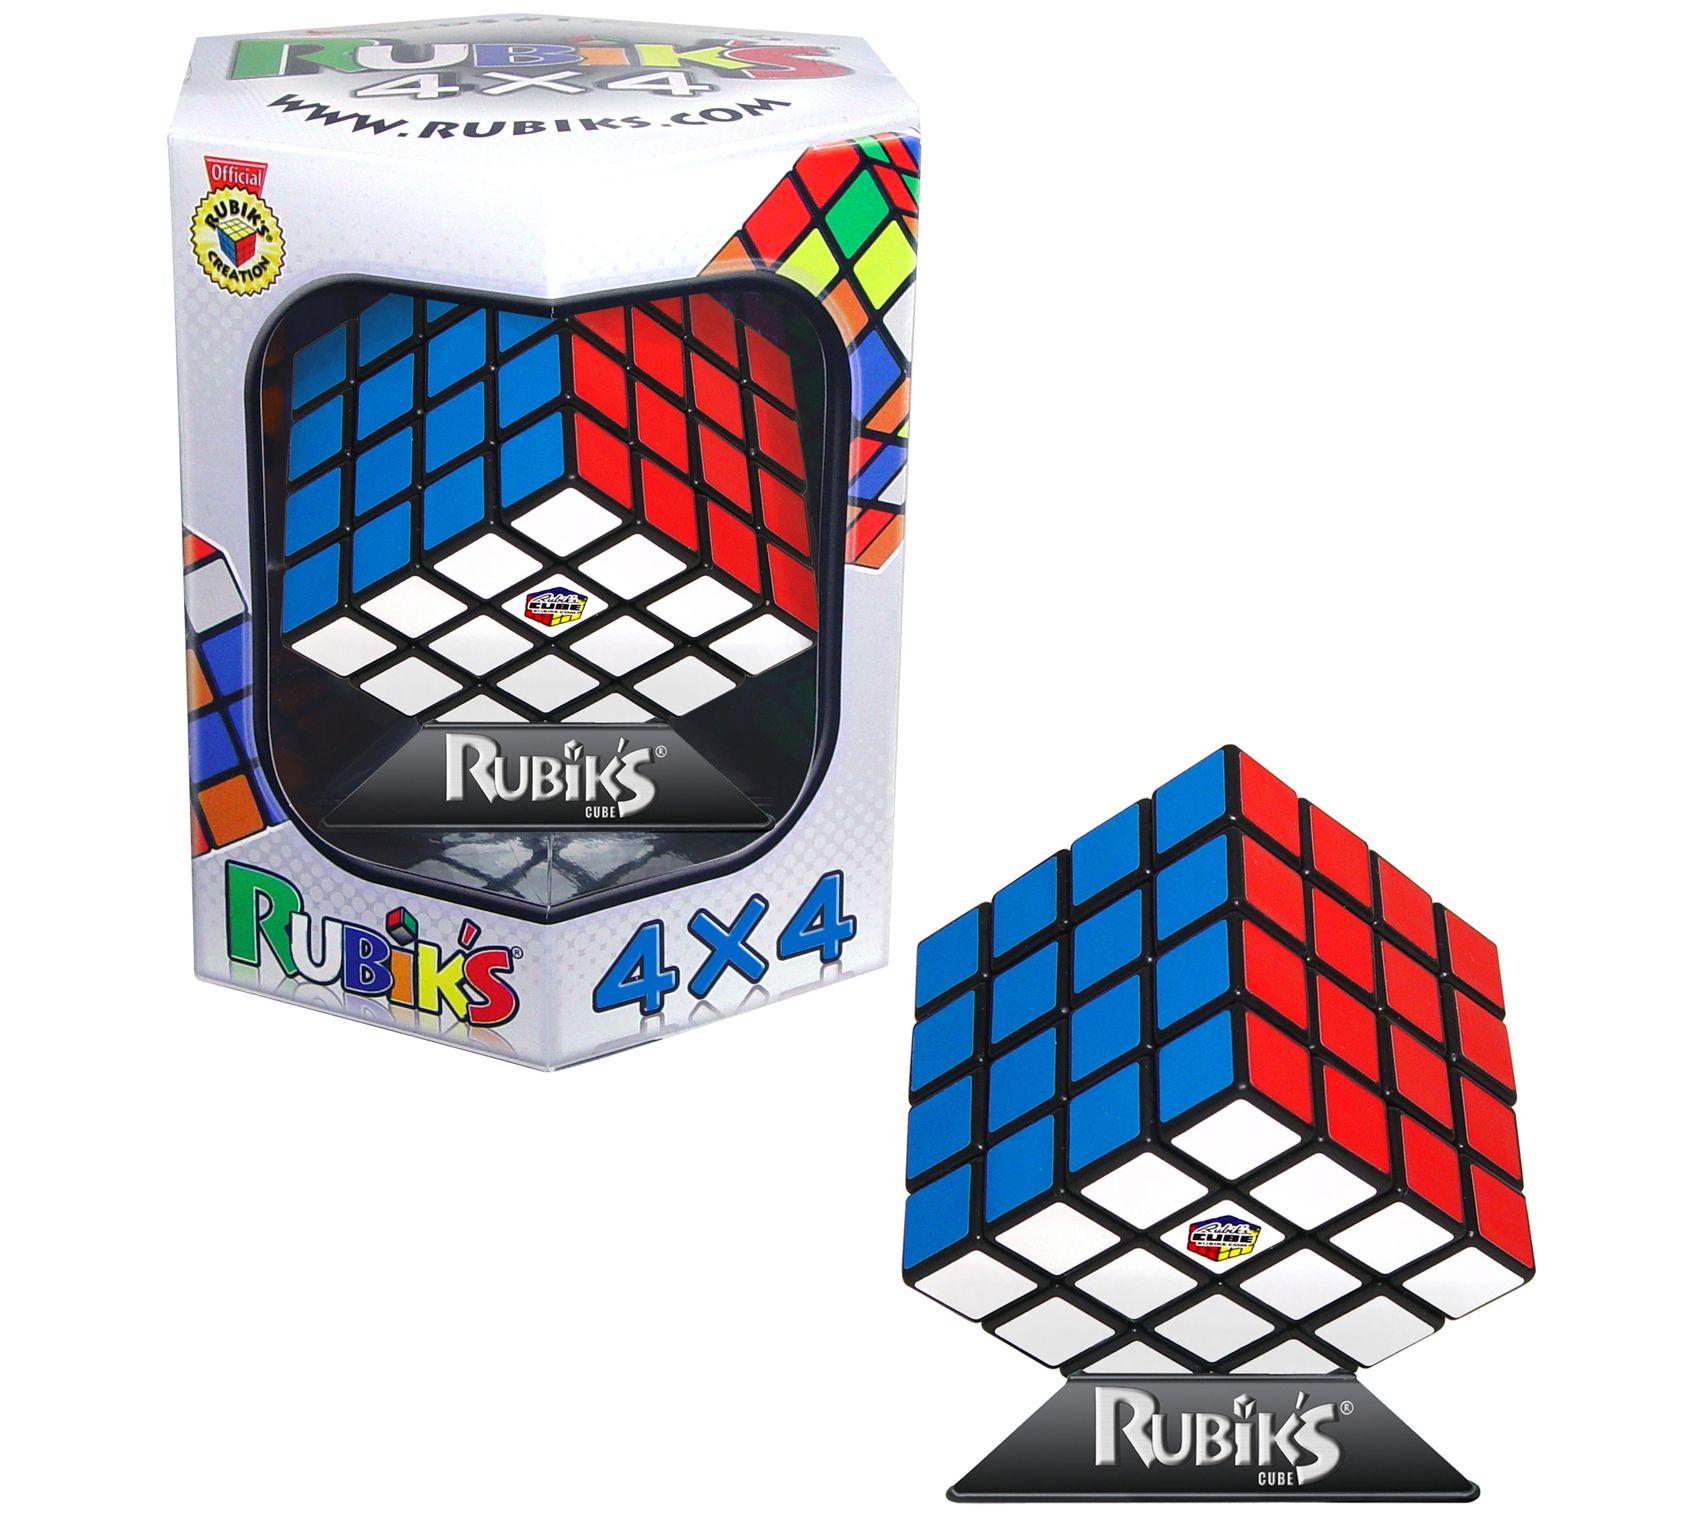 Rubiks Cube 4x4 by Winning Moves